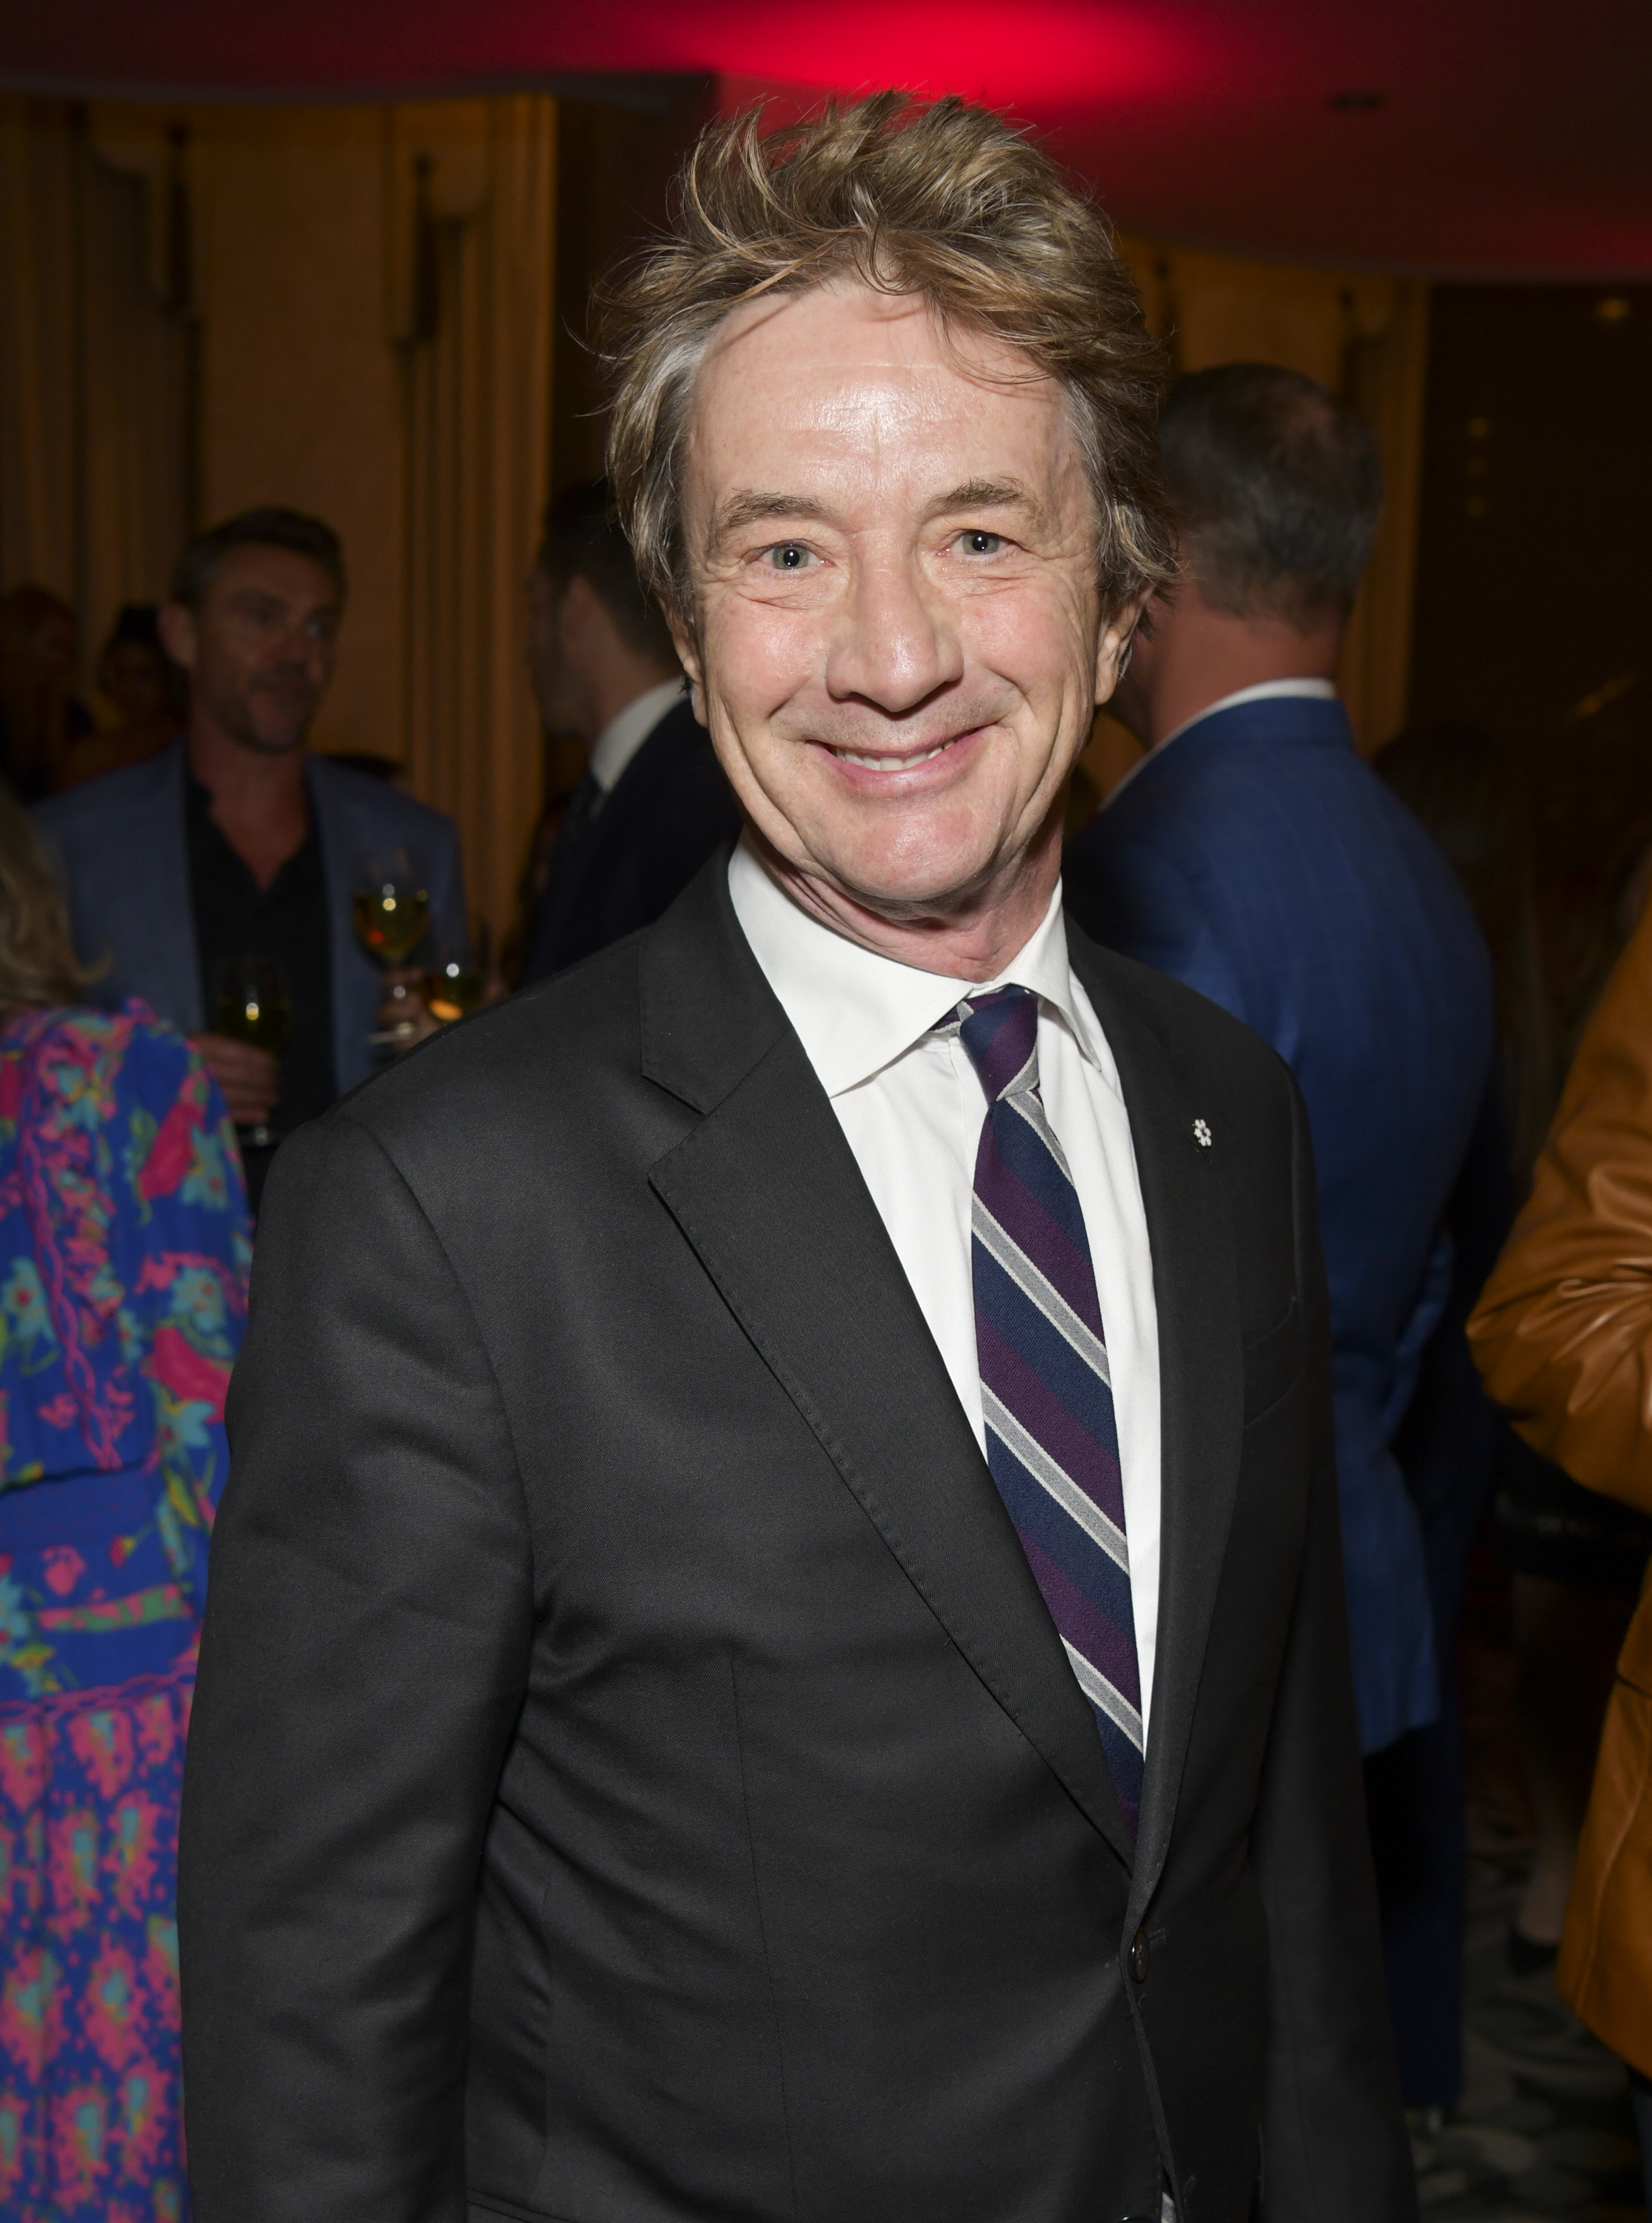 Martin Short poses for portrait at The Women's Cancer Research Fund's An Unforgettable Evening at Beverly Wilshire, A Four Seasons Hotel in Beverly Hills, California, on February 27, 2020. | Source: Getty Images